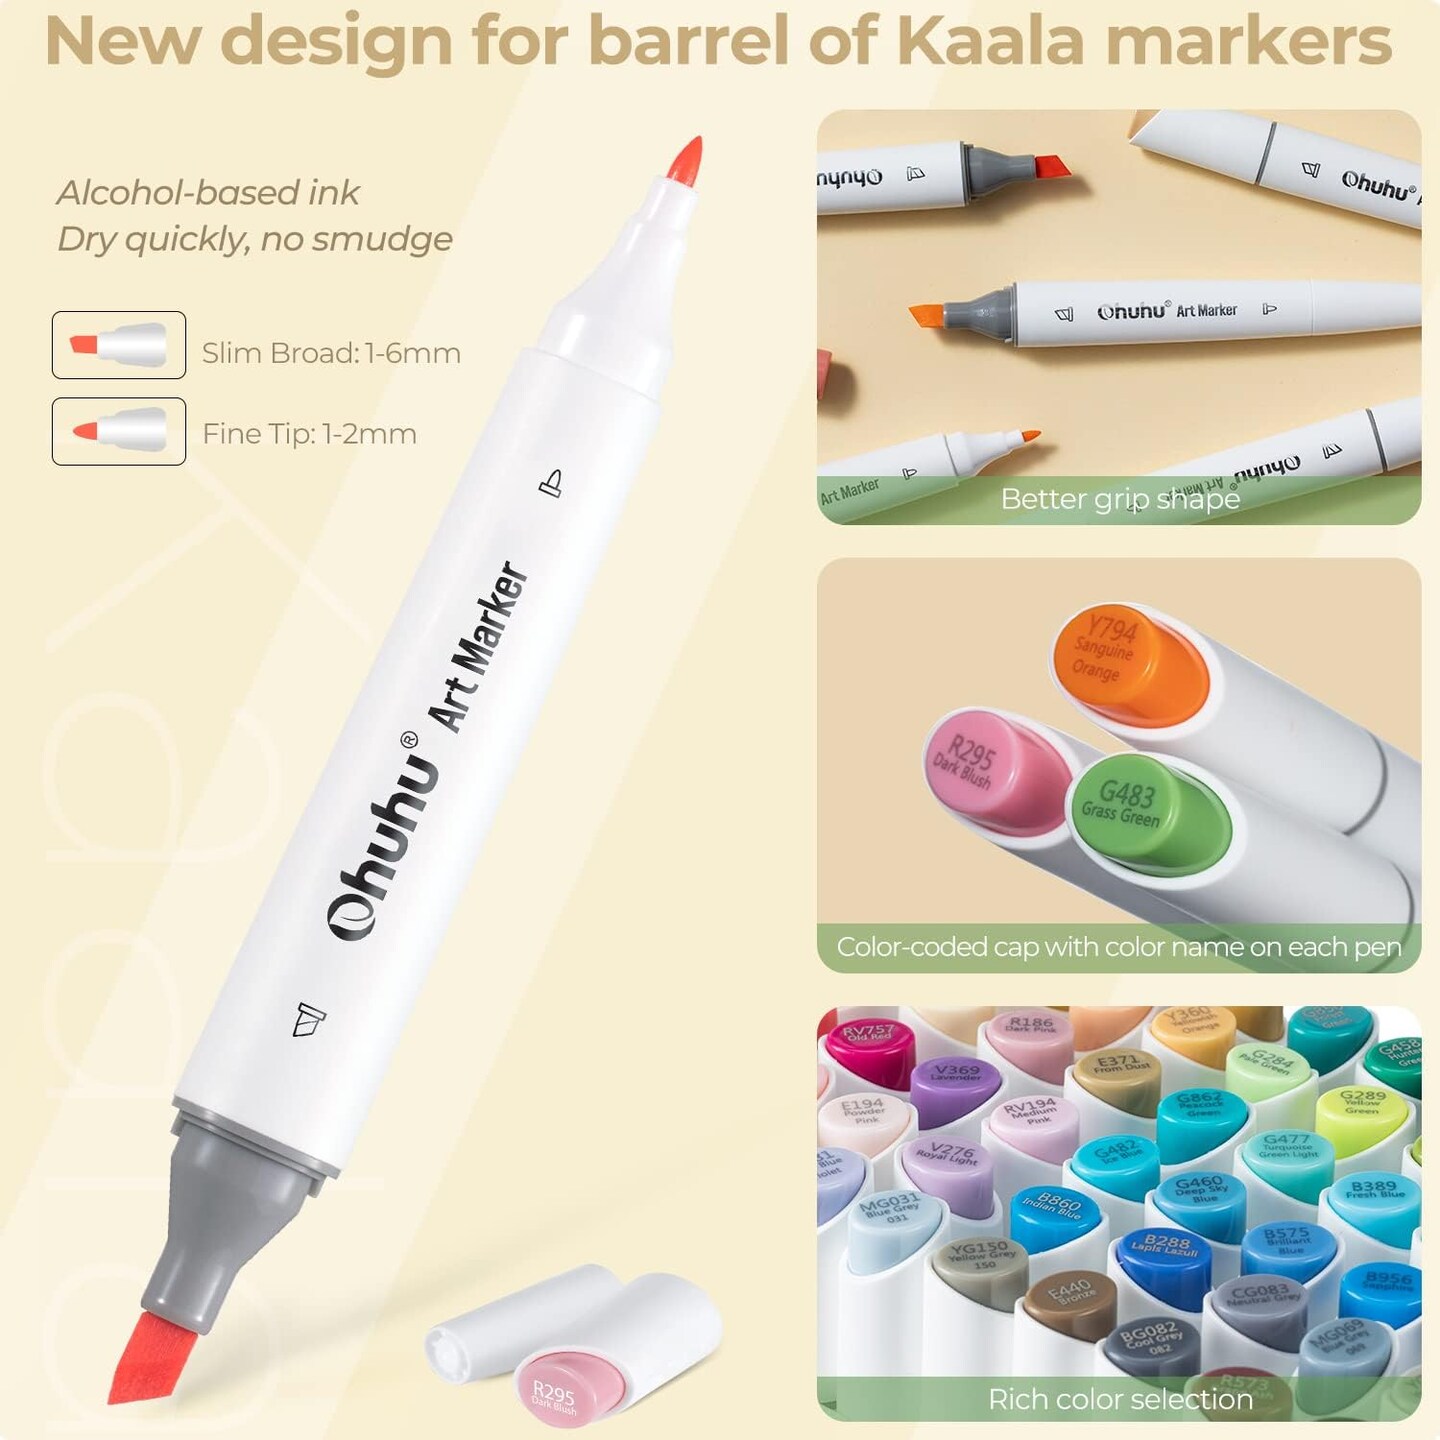 Ohuhu Alcohol Markers Slim Broad and Fine Double Tipped Art Marker Set for Artists Adults Coloring Drawing Landscape Design - 60 Colors Kaala Series of Ohuhu Markers with Refills Available